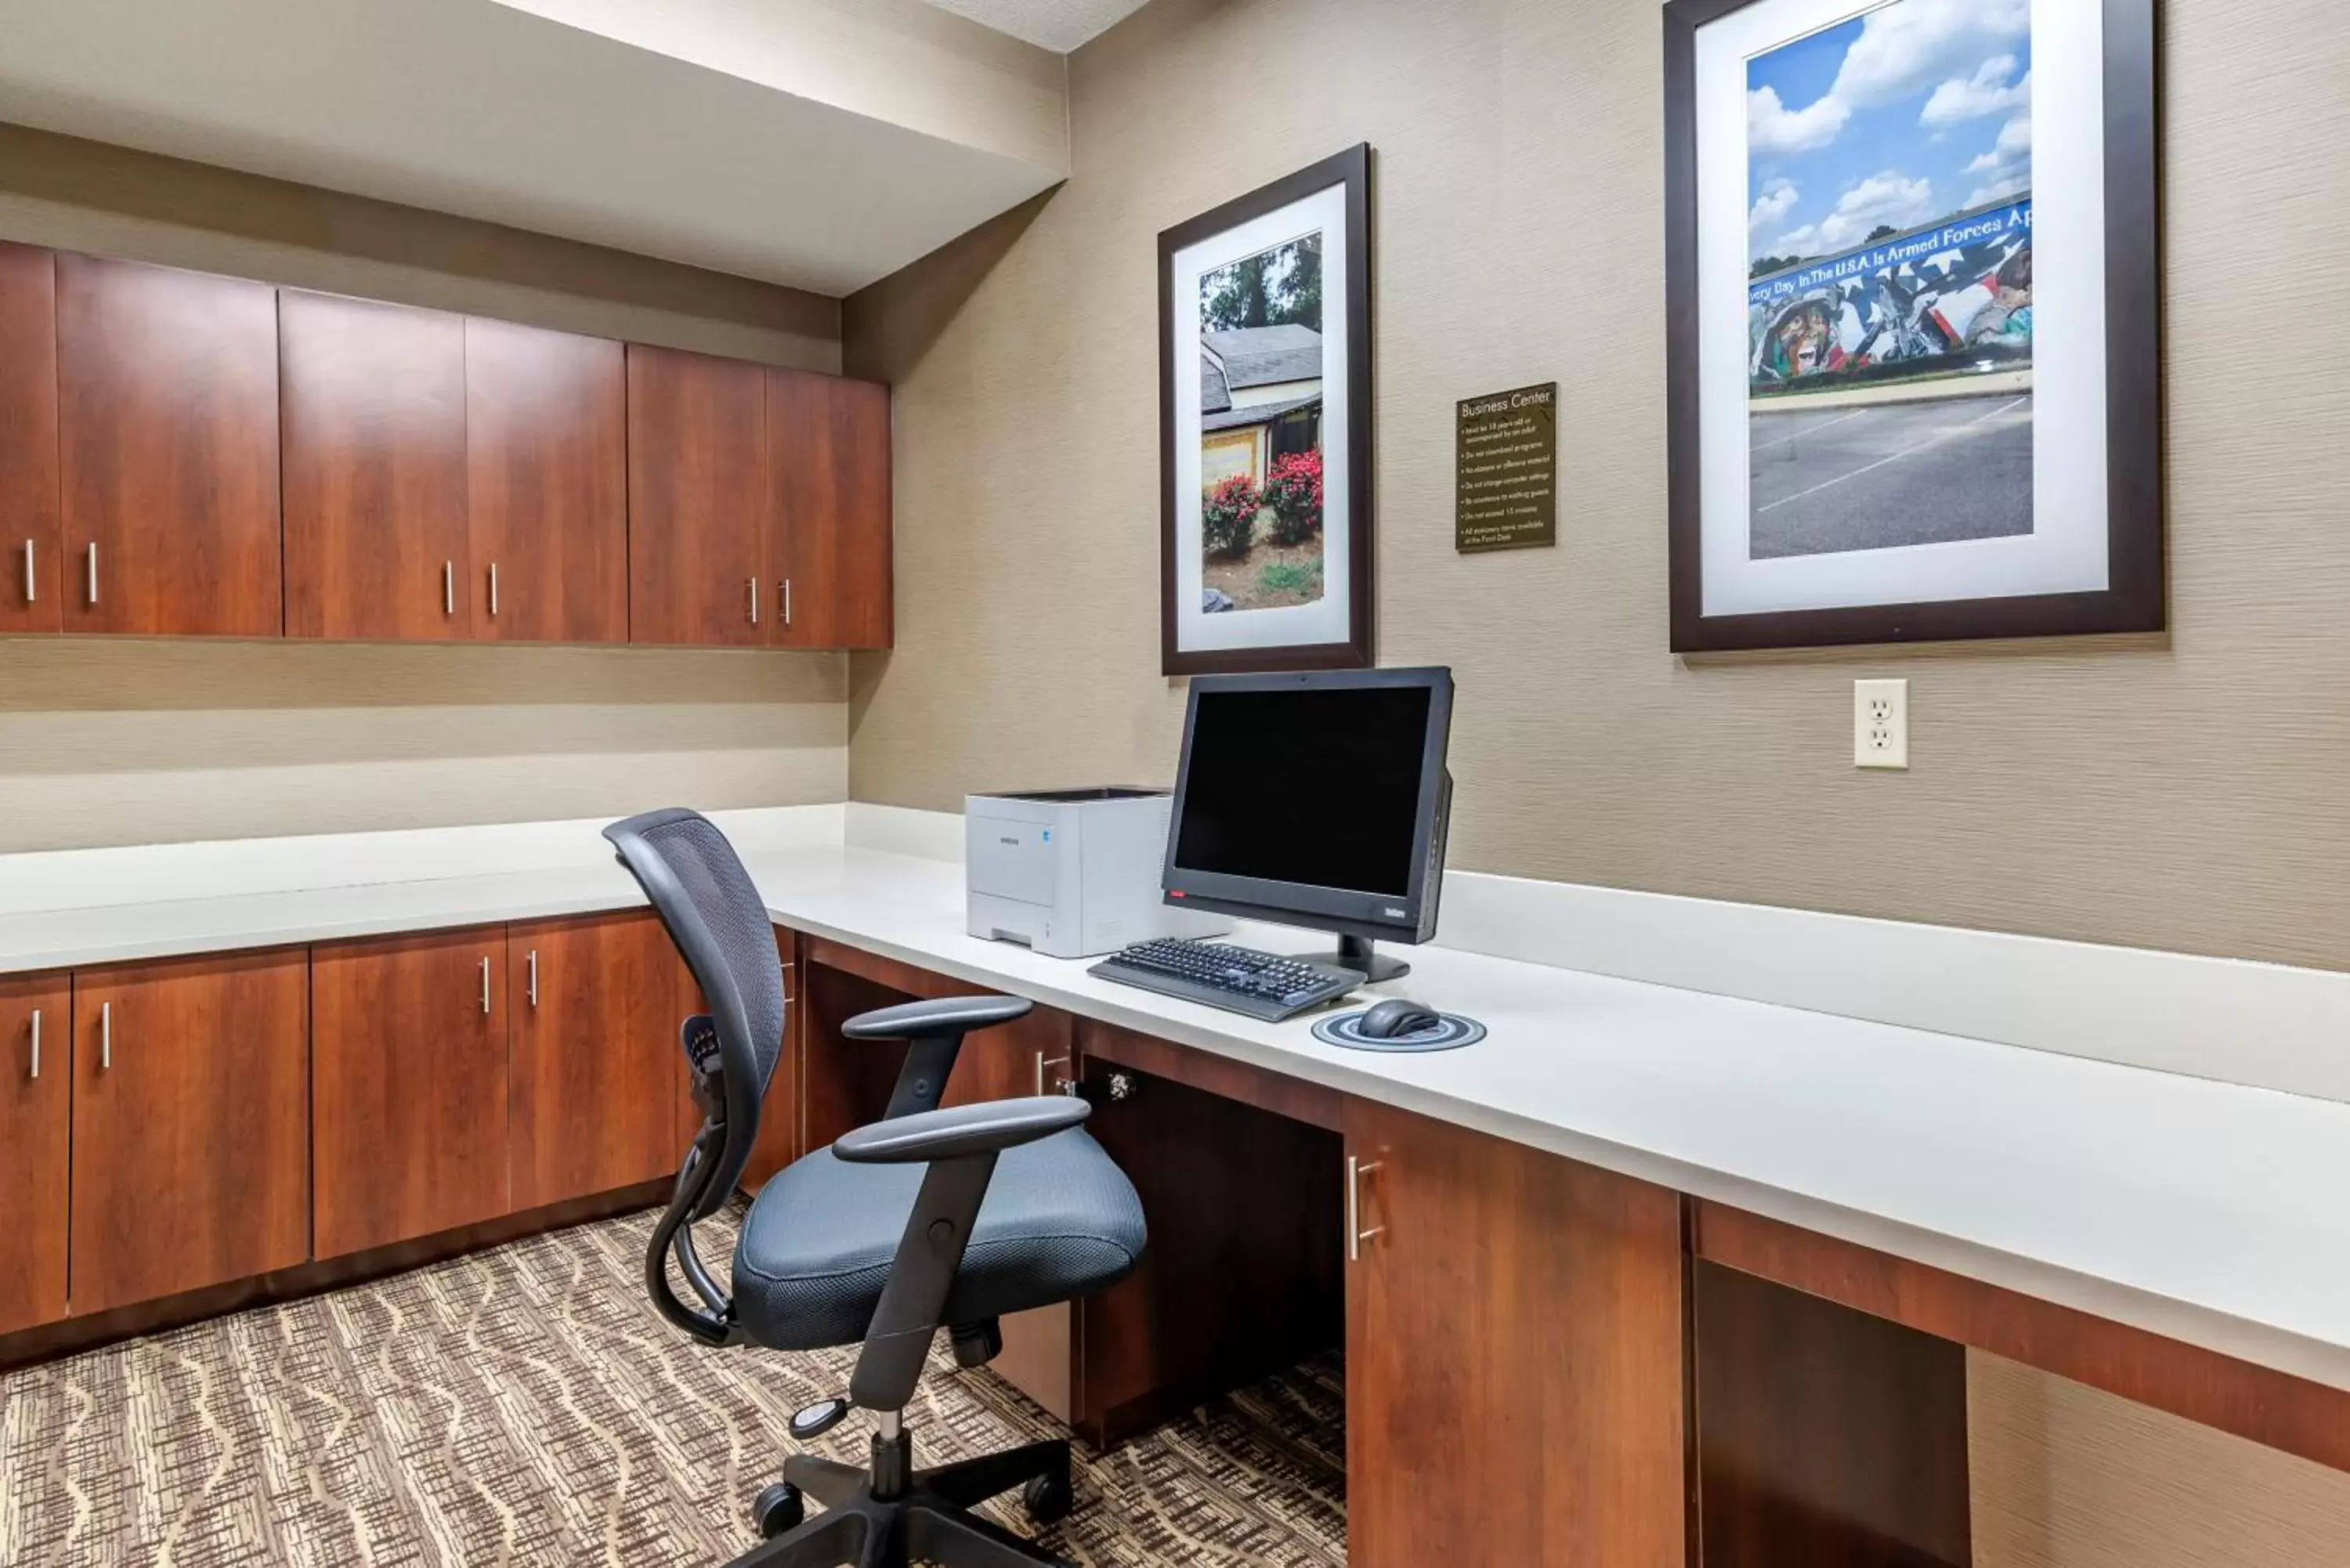 Business facilities in Comfort Suites near Robins Air Force Base